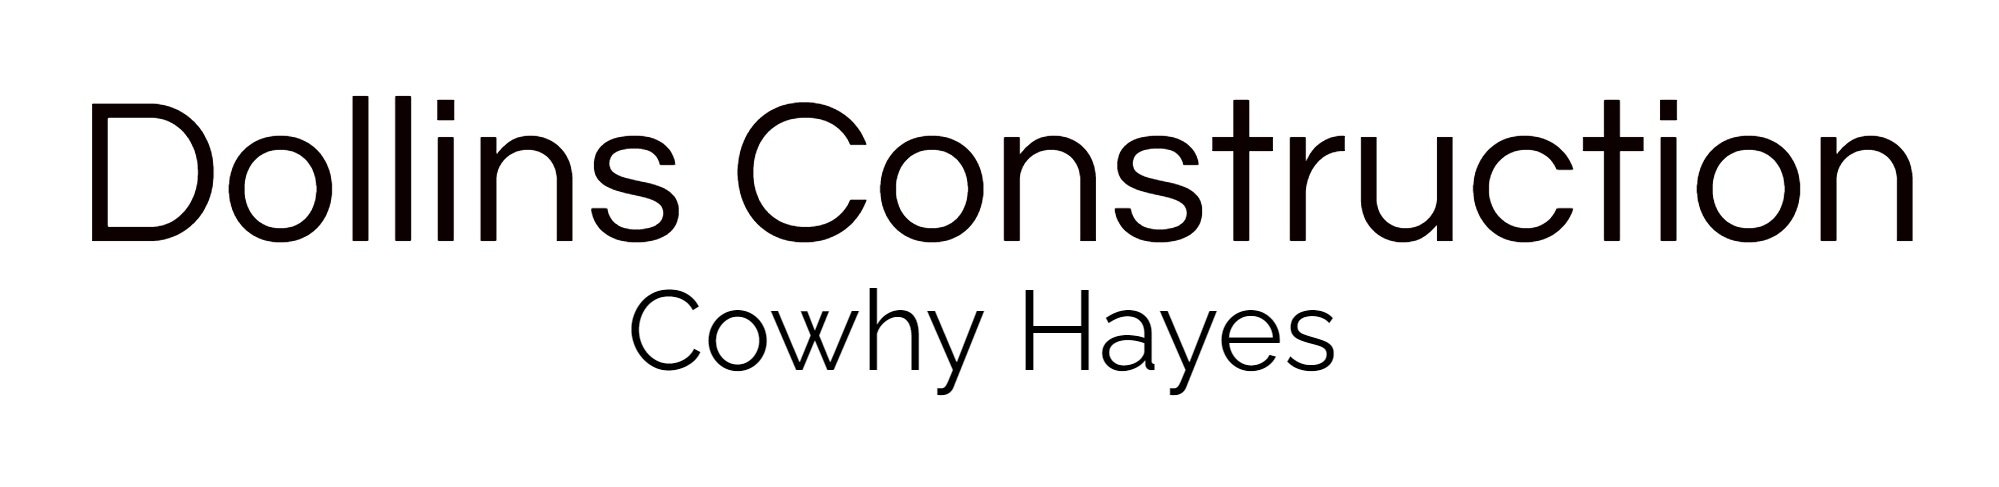 Dollins Construction Cowhy Hayes